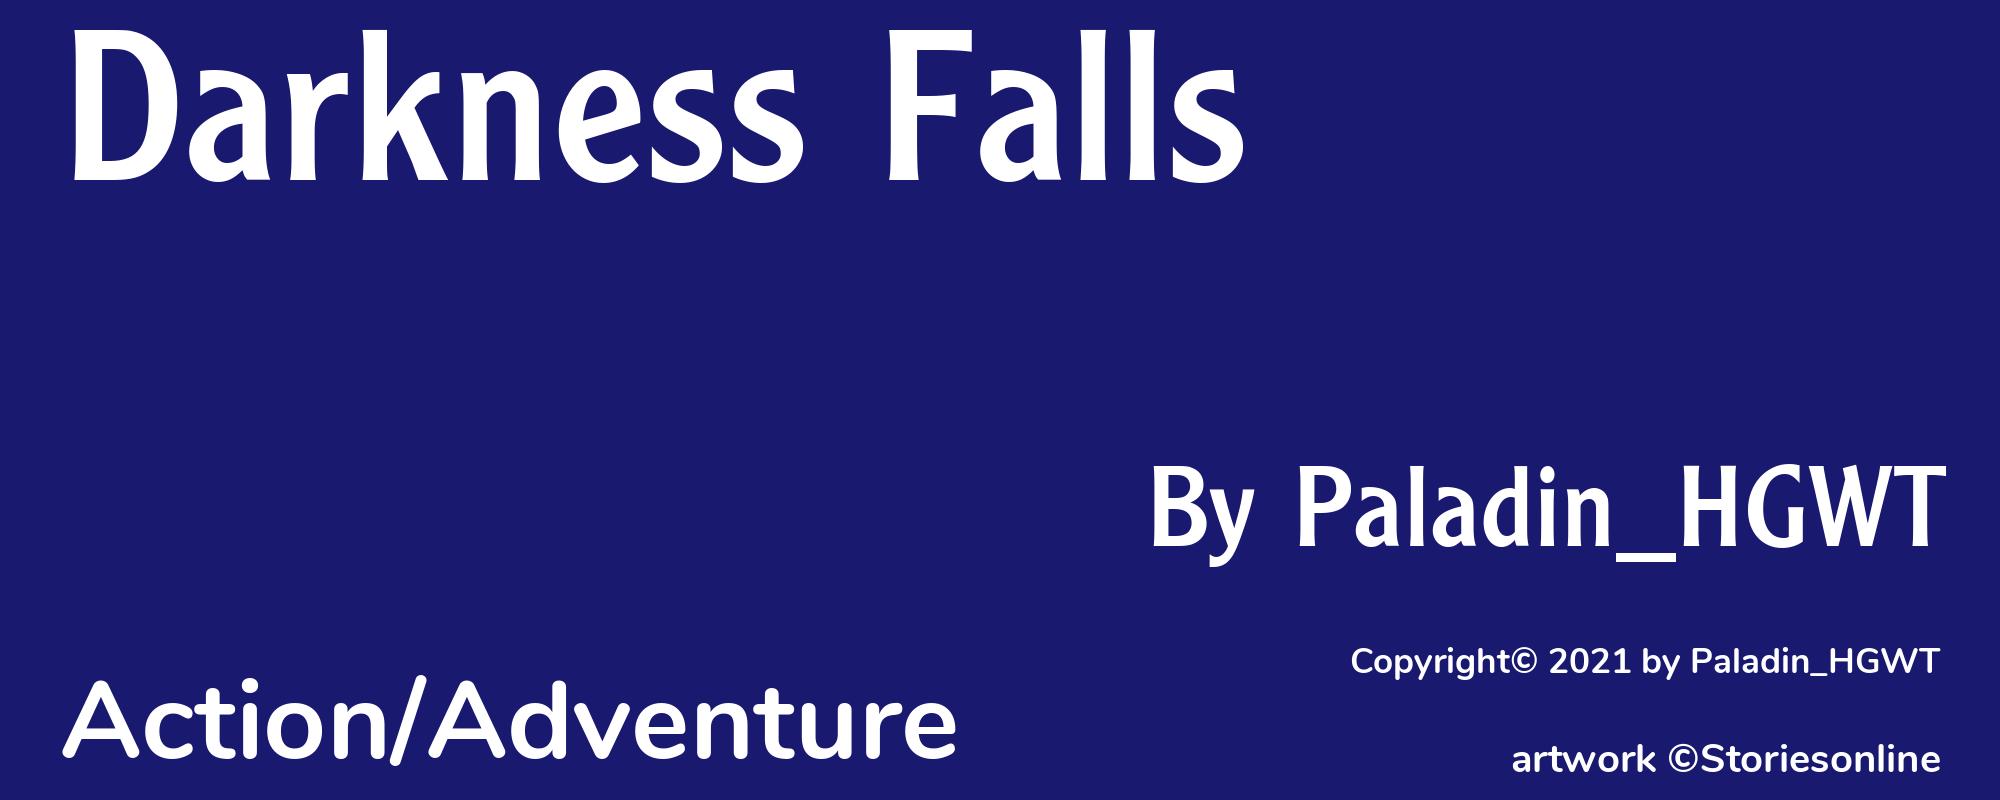 Darkness Falls - Cover